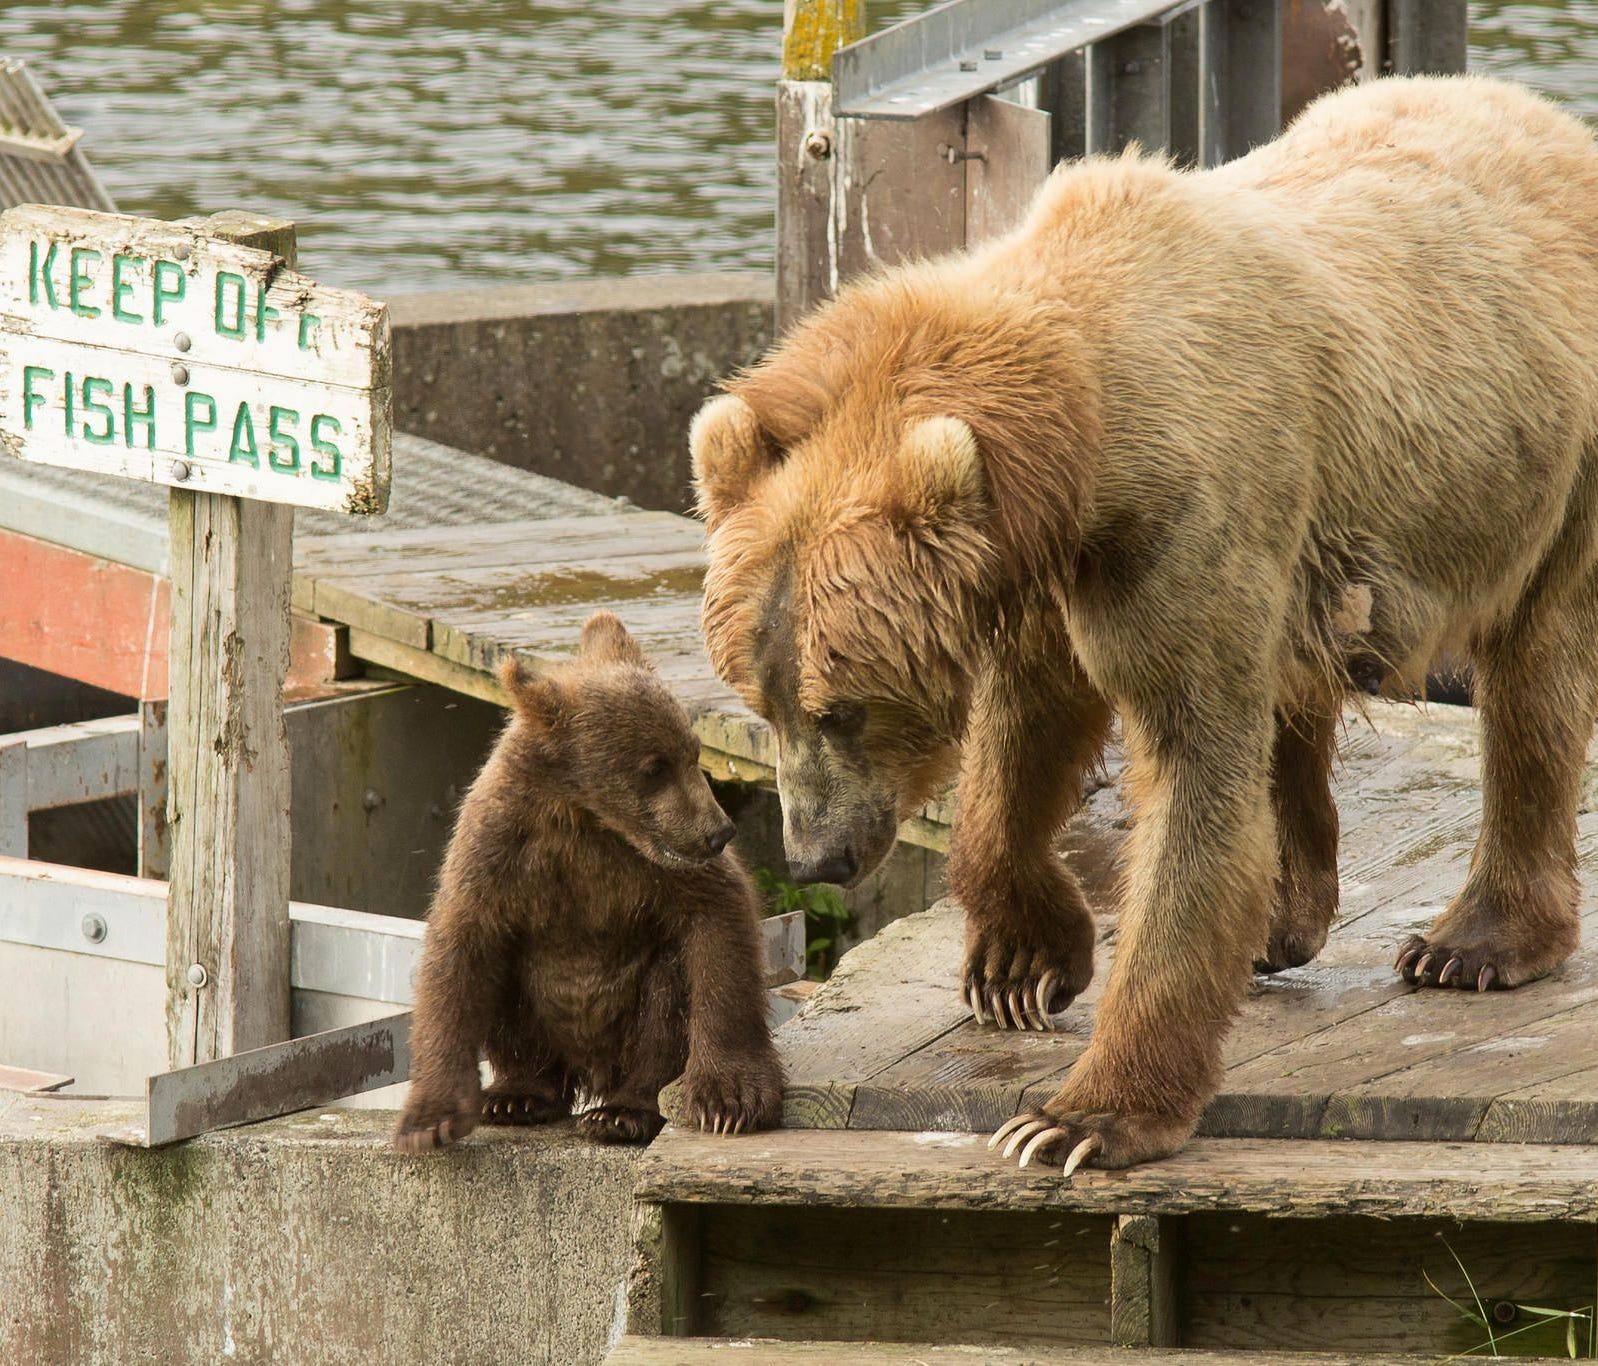 Inspired by concerned sportsmen and conservationists, President Franklin D. Roosevelt created Kodiak National Wildlife Refuge in 1941 to protect Kodiak bears and their habitat. With misty fjords, deep glacial valleys and lofty mountains, the refuge a